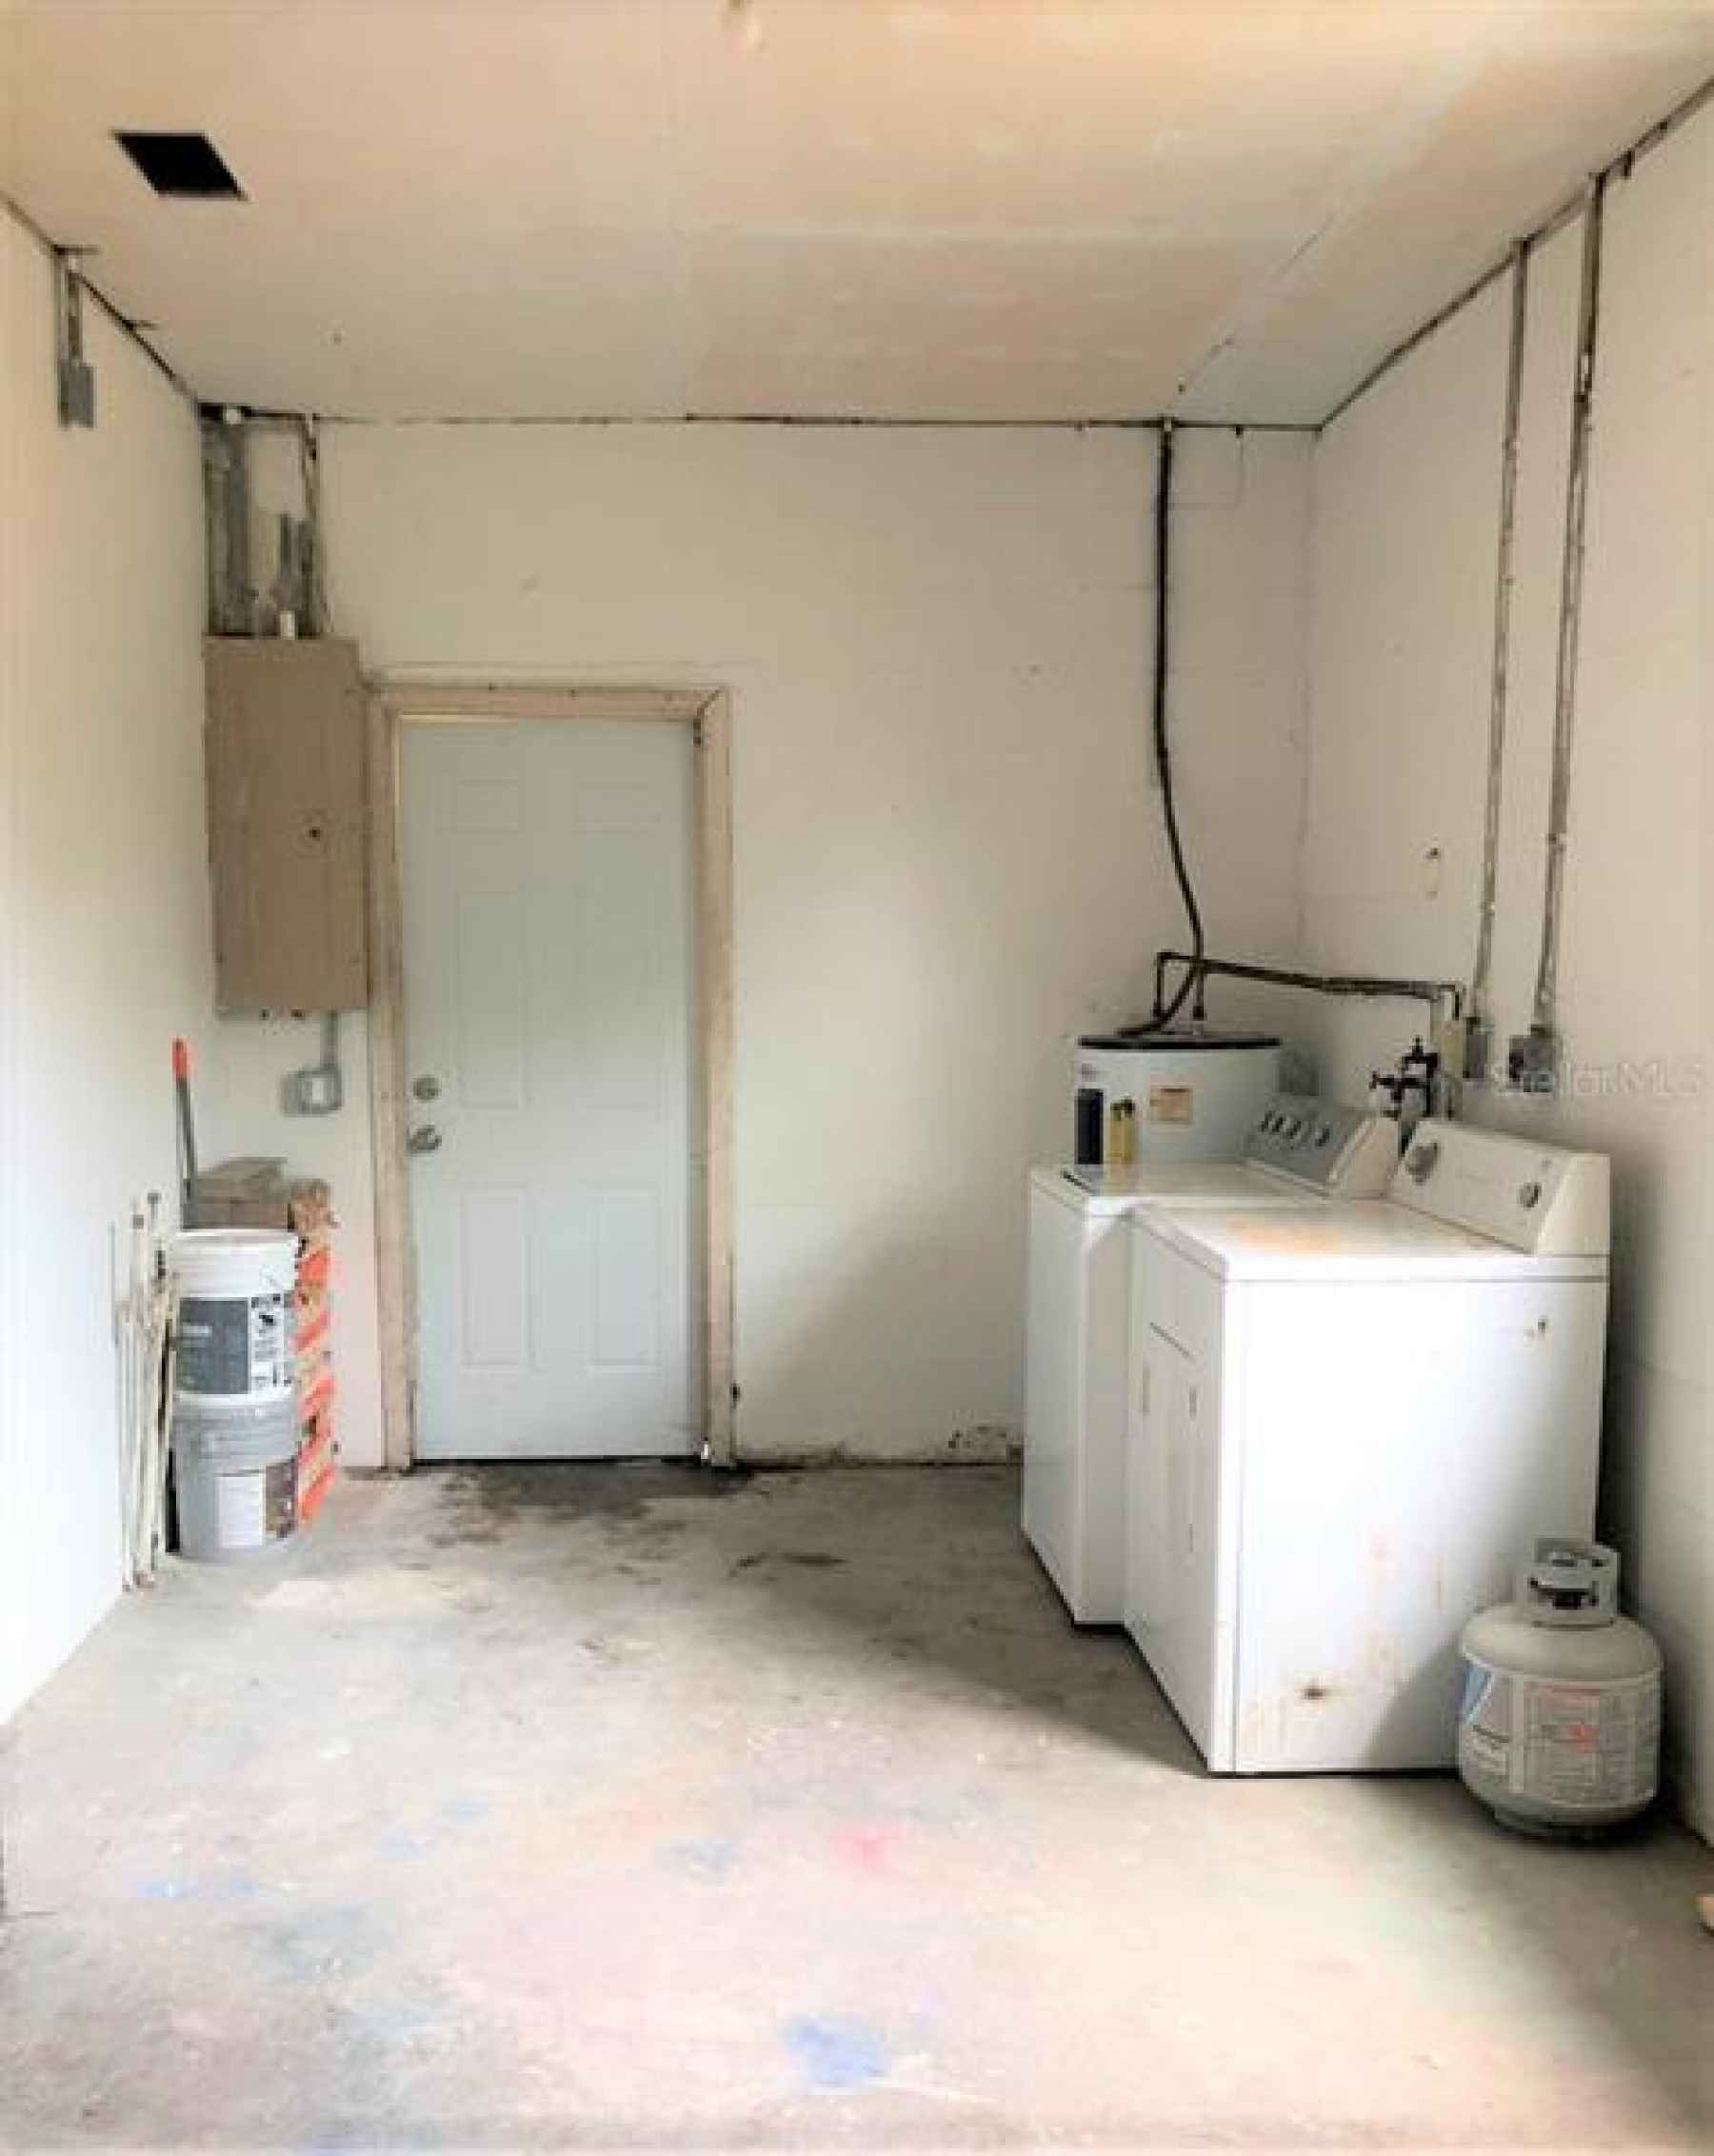 washer/dryer in the attached garage